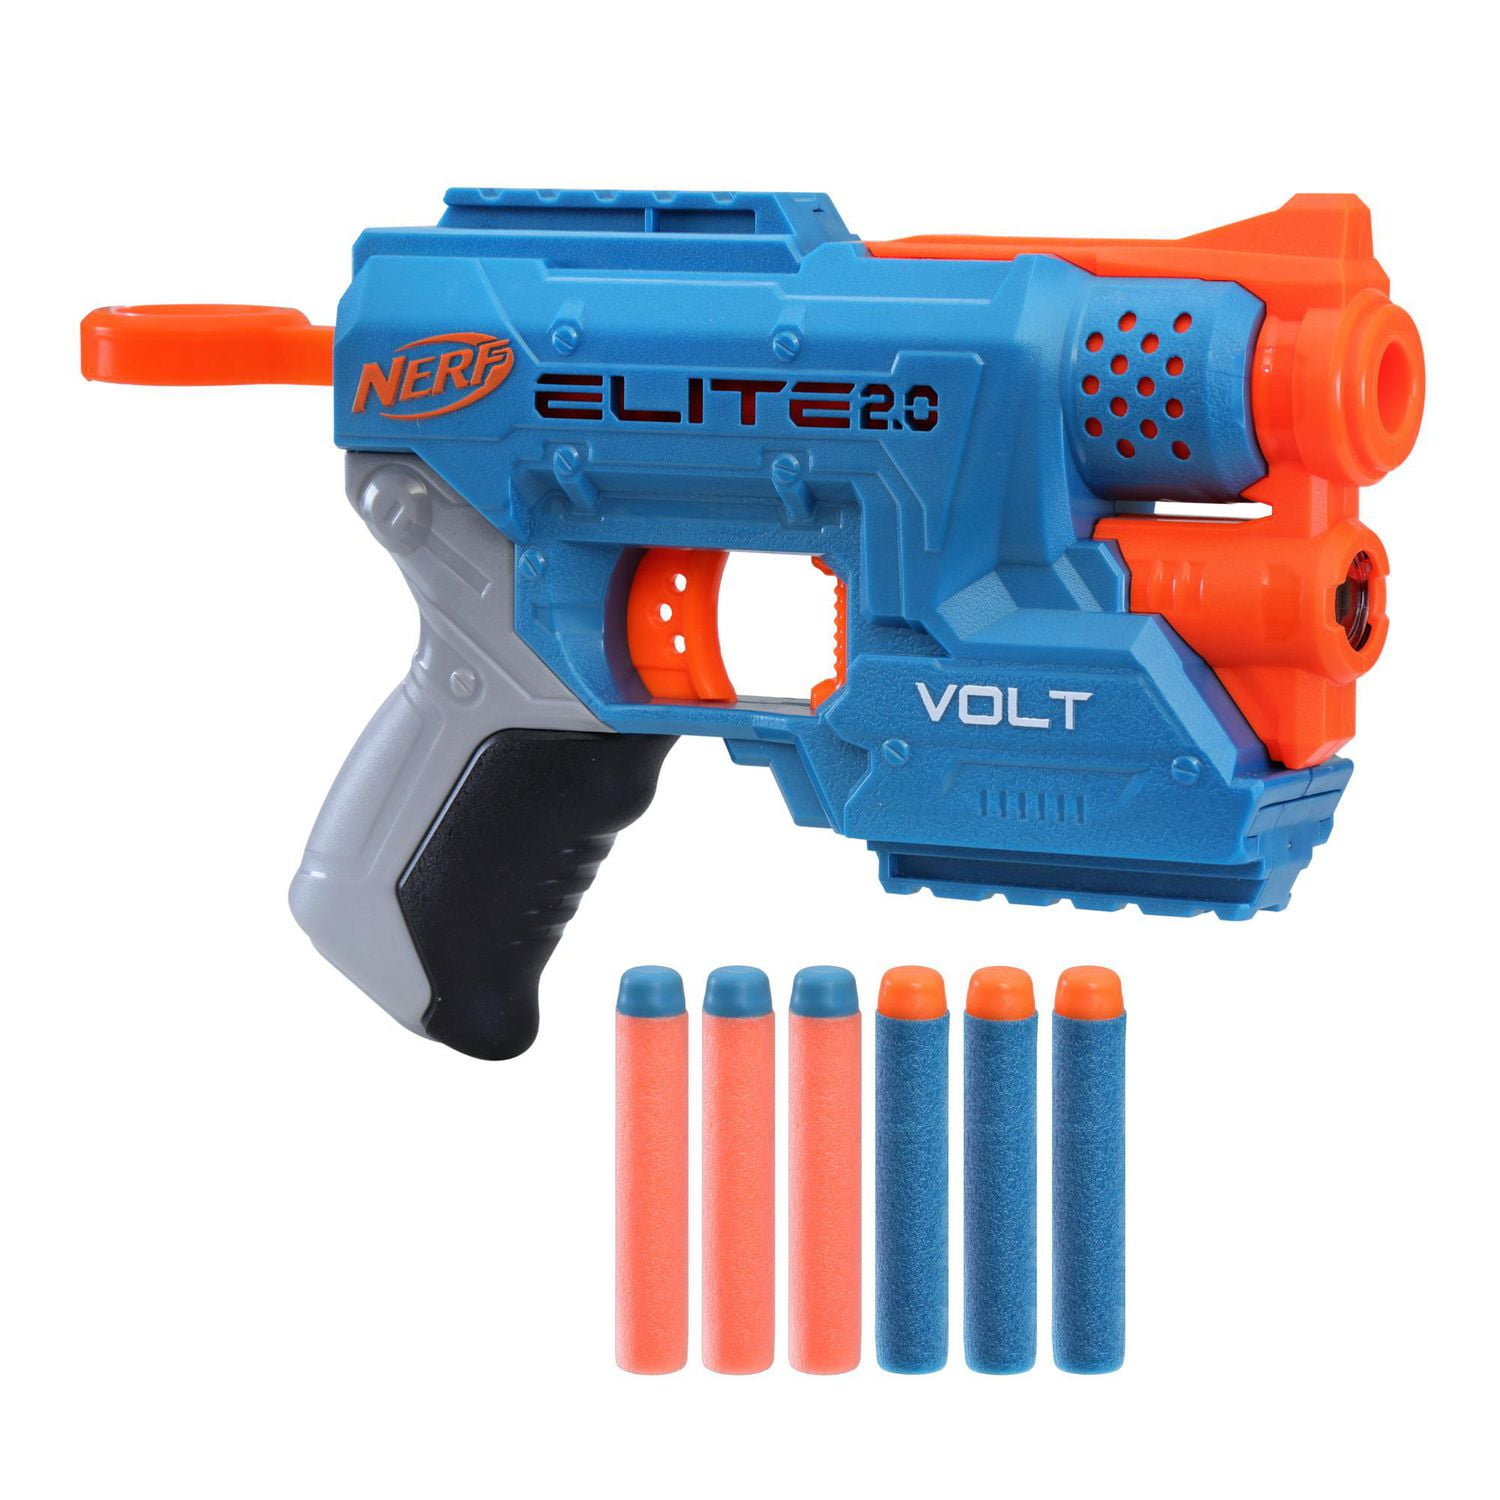 Nerf Elite 2.0 Volt SD-1 Blaster -- 6 Official Nerf Darts, Light Beam  Targeting, 2-Dart Storage, 2 Tactical Rails to Customize for Battle, Ages 8  and up 